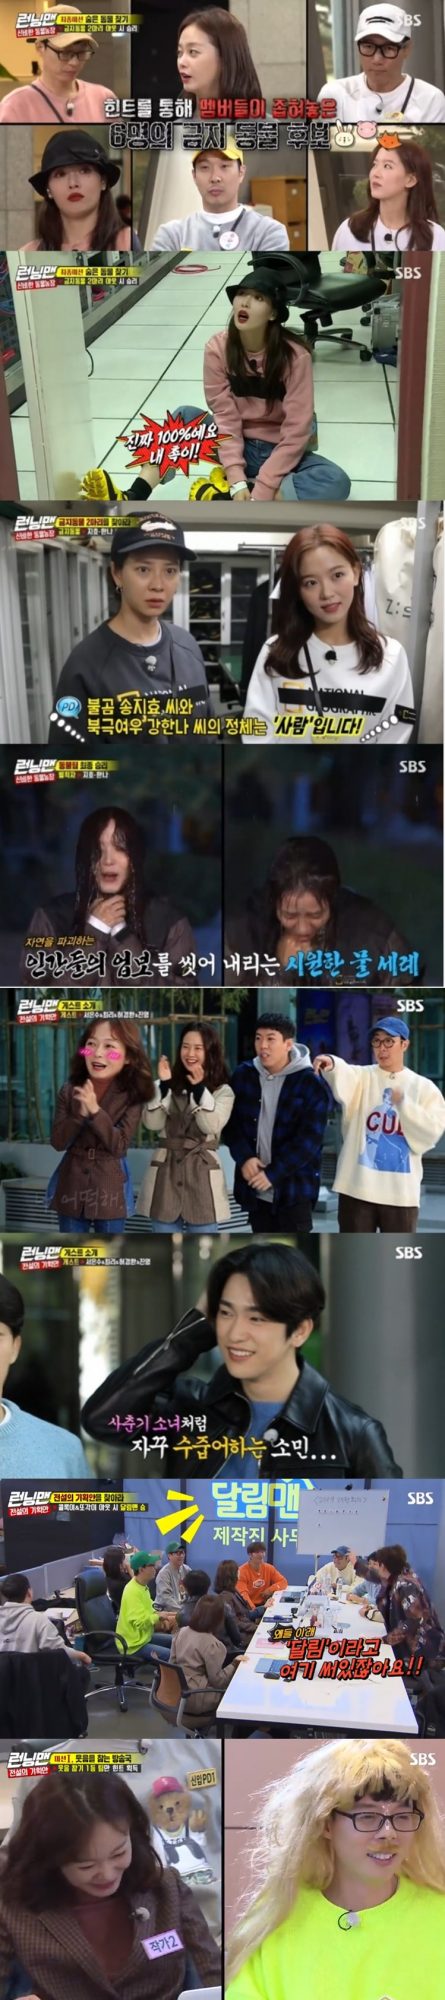 SBS Running Man climbed to 10% of Per minute top TV viewer ratings.According to Nielsen Korea, a TV viewer rating research institute, Running Man, which was broadcast on the 17th, showed an increase in TV viewer ratings for the sixth consecutive week, with an average TV viewer ratings of 5.4% and 2 episodes of 8.3%.The 2049 Target TV viewer ratings, which is an important indicator of major advertising officials, rose by 4.8% (based on the second part of the Seoul metropolitan areas TV viewer ratings), not only to overtake MBCs Masked Wang and KBS2s Donkey Ears, but also 1% more than last week.Per minute Top TV viewer ratings shot 10 per centThe broadcast was decorated with the final race of Mysterious Animal Farm, and the members began to search for banned animals.General animals can only win by finding banned animals and in-N-Out Burger. The prohibited animals have the advantage of using the At Close Range to make the general animals in-N-Out Burger.When an In-N-Out Burgered animal is created by a prohibited animal, the At Close Range is created, and all hints in the At Close Range disappear, and the In-N-Out Burger is also made even if the animal is inside it.Yoo Jae-Suks performance shone in the face of everyone questioning each other.Yoo Jae-Suk found out that the forbidden animal was a person, and noticed that Kang Han-Na and Song Ji-hyo were sisters and bears who became foxes respectively.In the meantime, Kang Han-Na and Song Ji-hyo respectively targeted Hyun-ah and Everglow Shihyeon in-N-Out Burger and Yoo Jae-Suk.Yoo Jae-Suk informed members of the identity of the banned animals in an urgent situation and eventually the banned animals Kang Han-Na and Song Ji-hyo were in-N-Out Burger and received the final penalty.The Legendary Plan race also started. Godseven Jinyoung, actors Seo Eun-soo, Choi Ri and comedian Hur Kyung-hwan appeared as guests.Jeon So-min welcomed Jinyoung by revealing his excitement, but gave a big smile with sweat.Since then, members have been divided into PD, writers, and new PD teams of the Running Man program to start searching for Kolok and Taegak, which are reported as ghost stories of broadcasters.The first mission was to find a laugh. You have to put up with laughter under any circumstances and perform a dressing penalty if you laugh.A questionable tool uncle appeared in front of the members while a fierce laughter confrontation was held.Everyone was nervous about the powerful laugh alarm and this scene took the best one minute with 10% of Per minute top TV viewer ratings.Next weeks broadcast will reveal the identity of Kolocki and Lee.